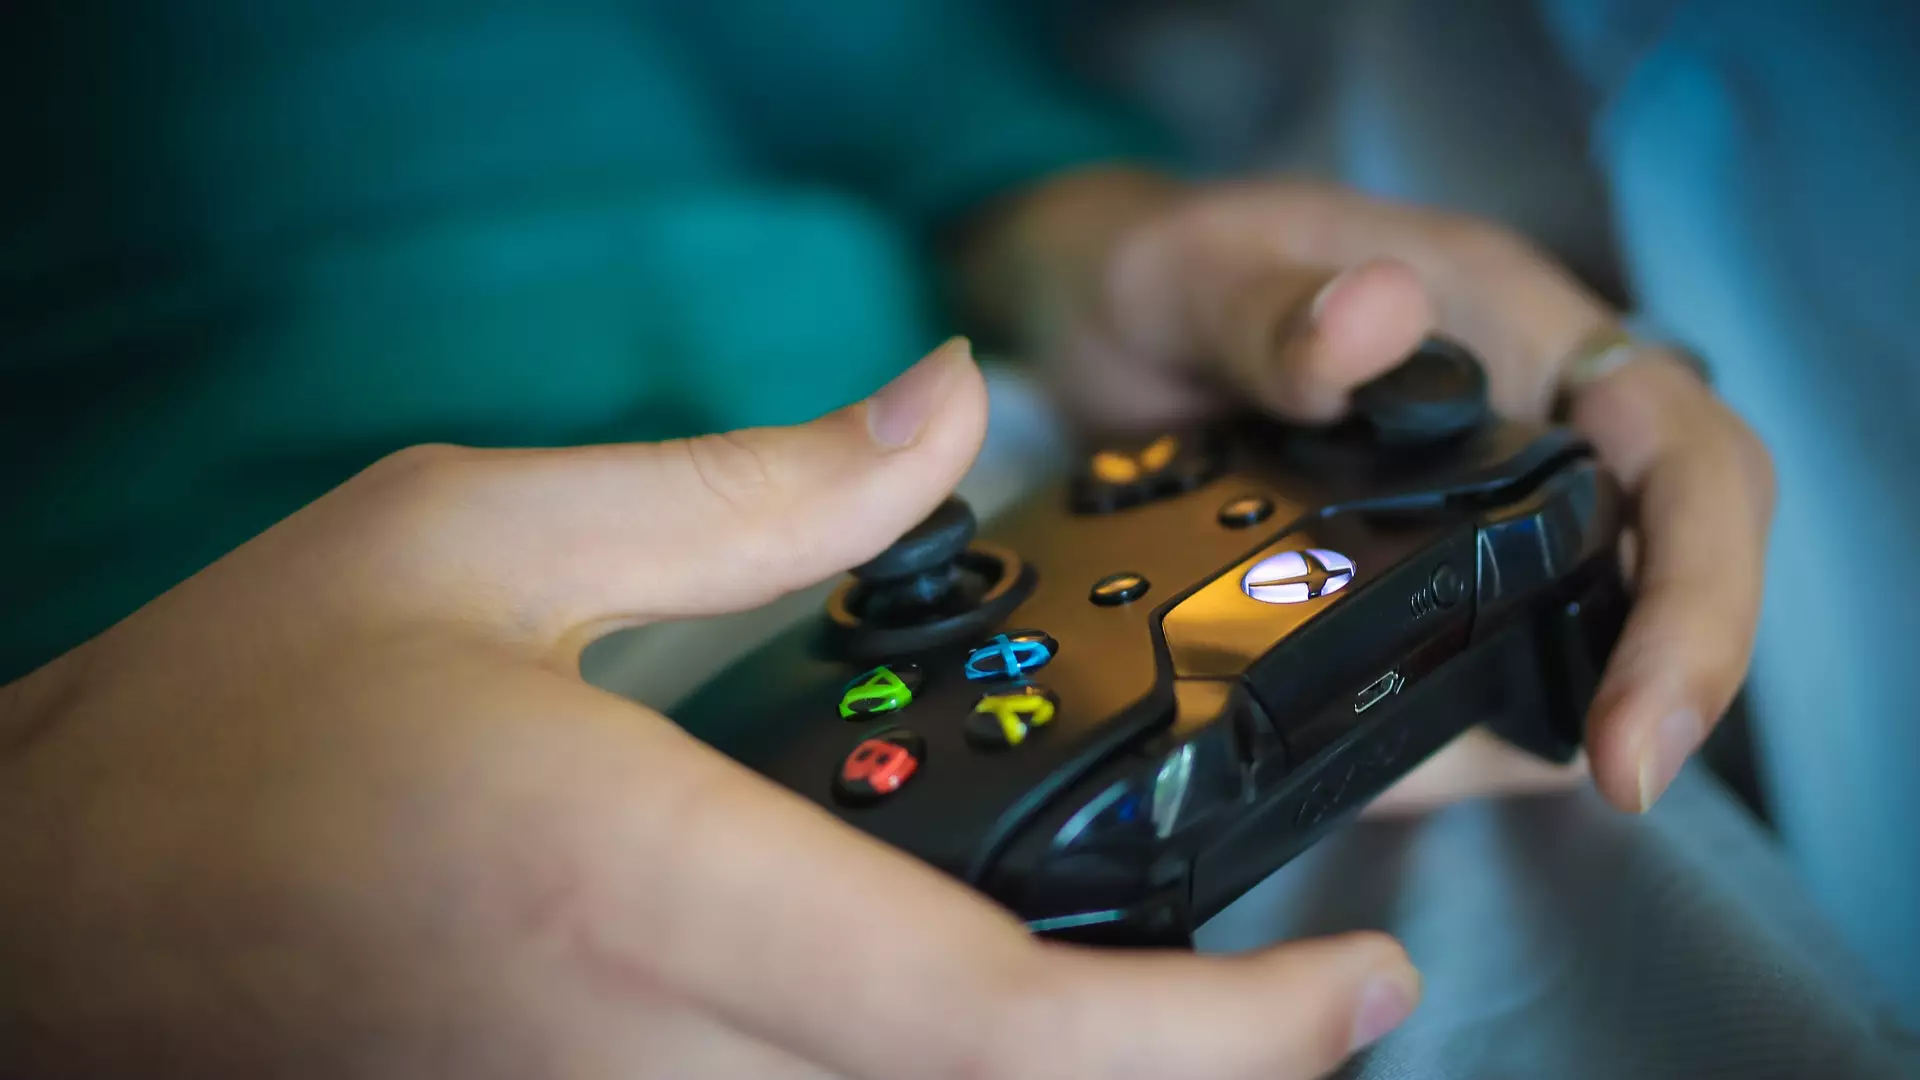 ‘Offensive’ Language On Xbox Live Could Lead To Ban